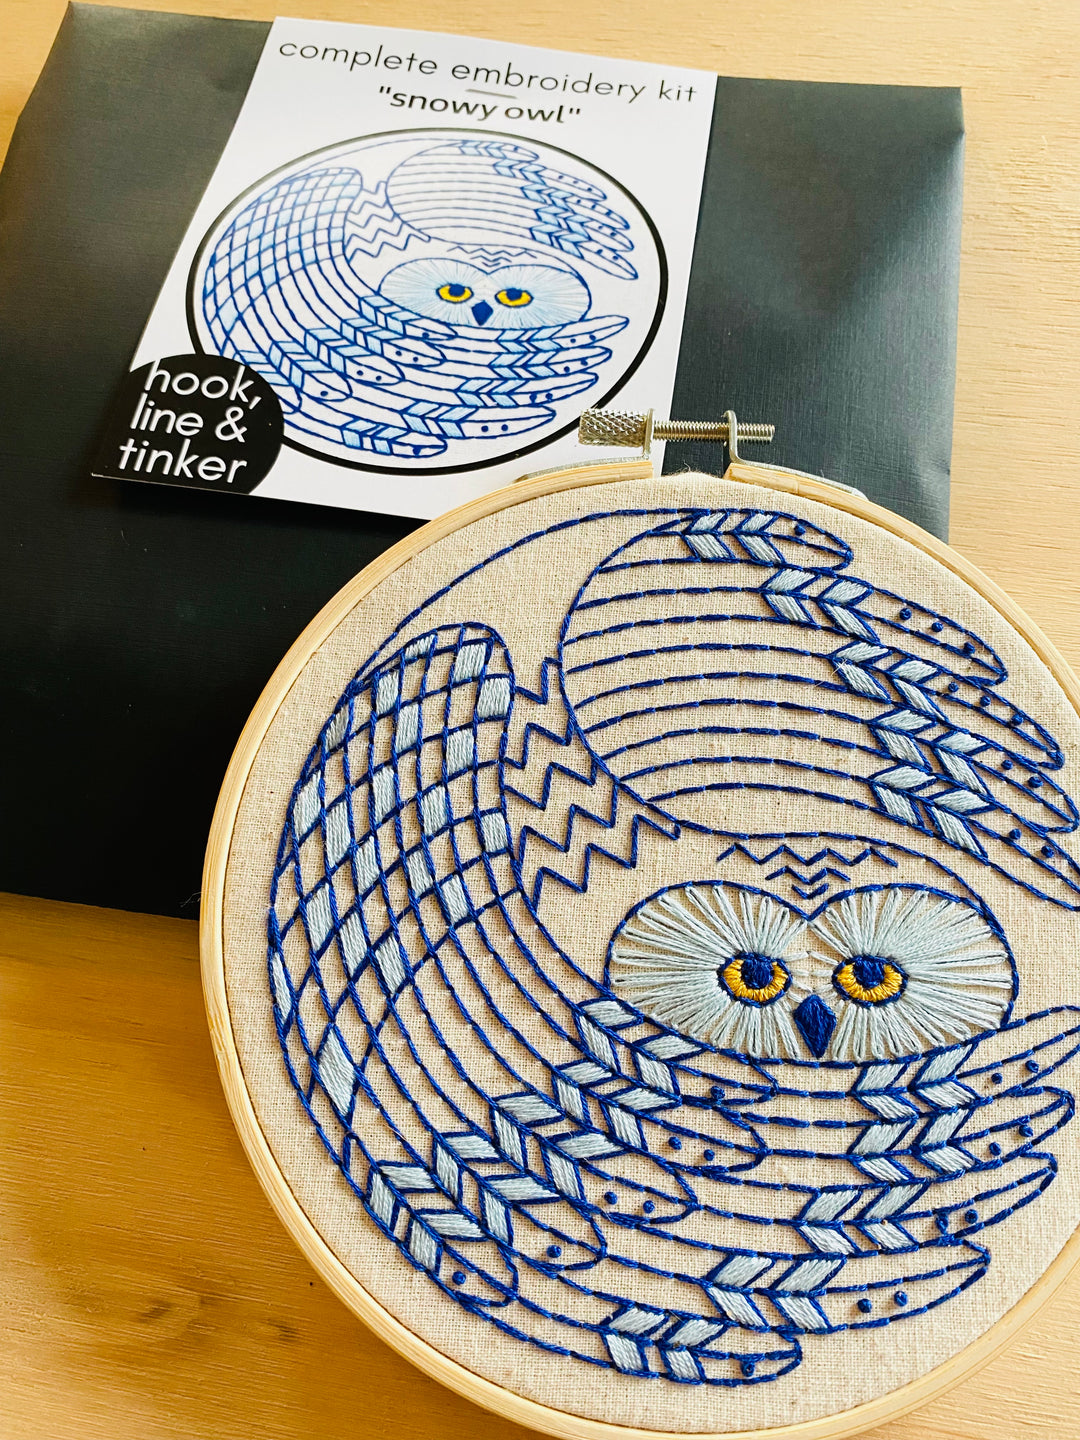 Craftermoon - NEW! Snowy Owl Complete Embroidery Kit 2